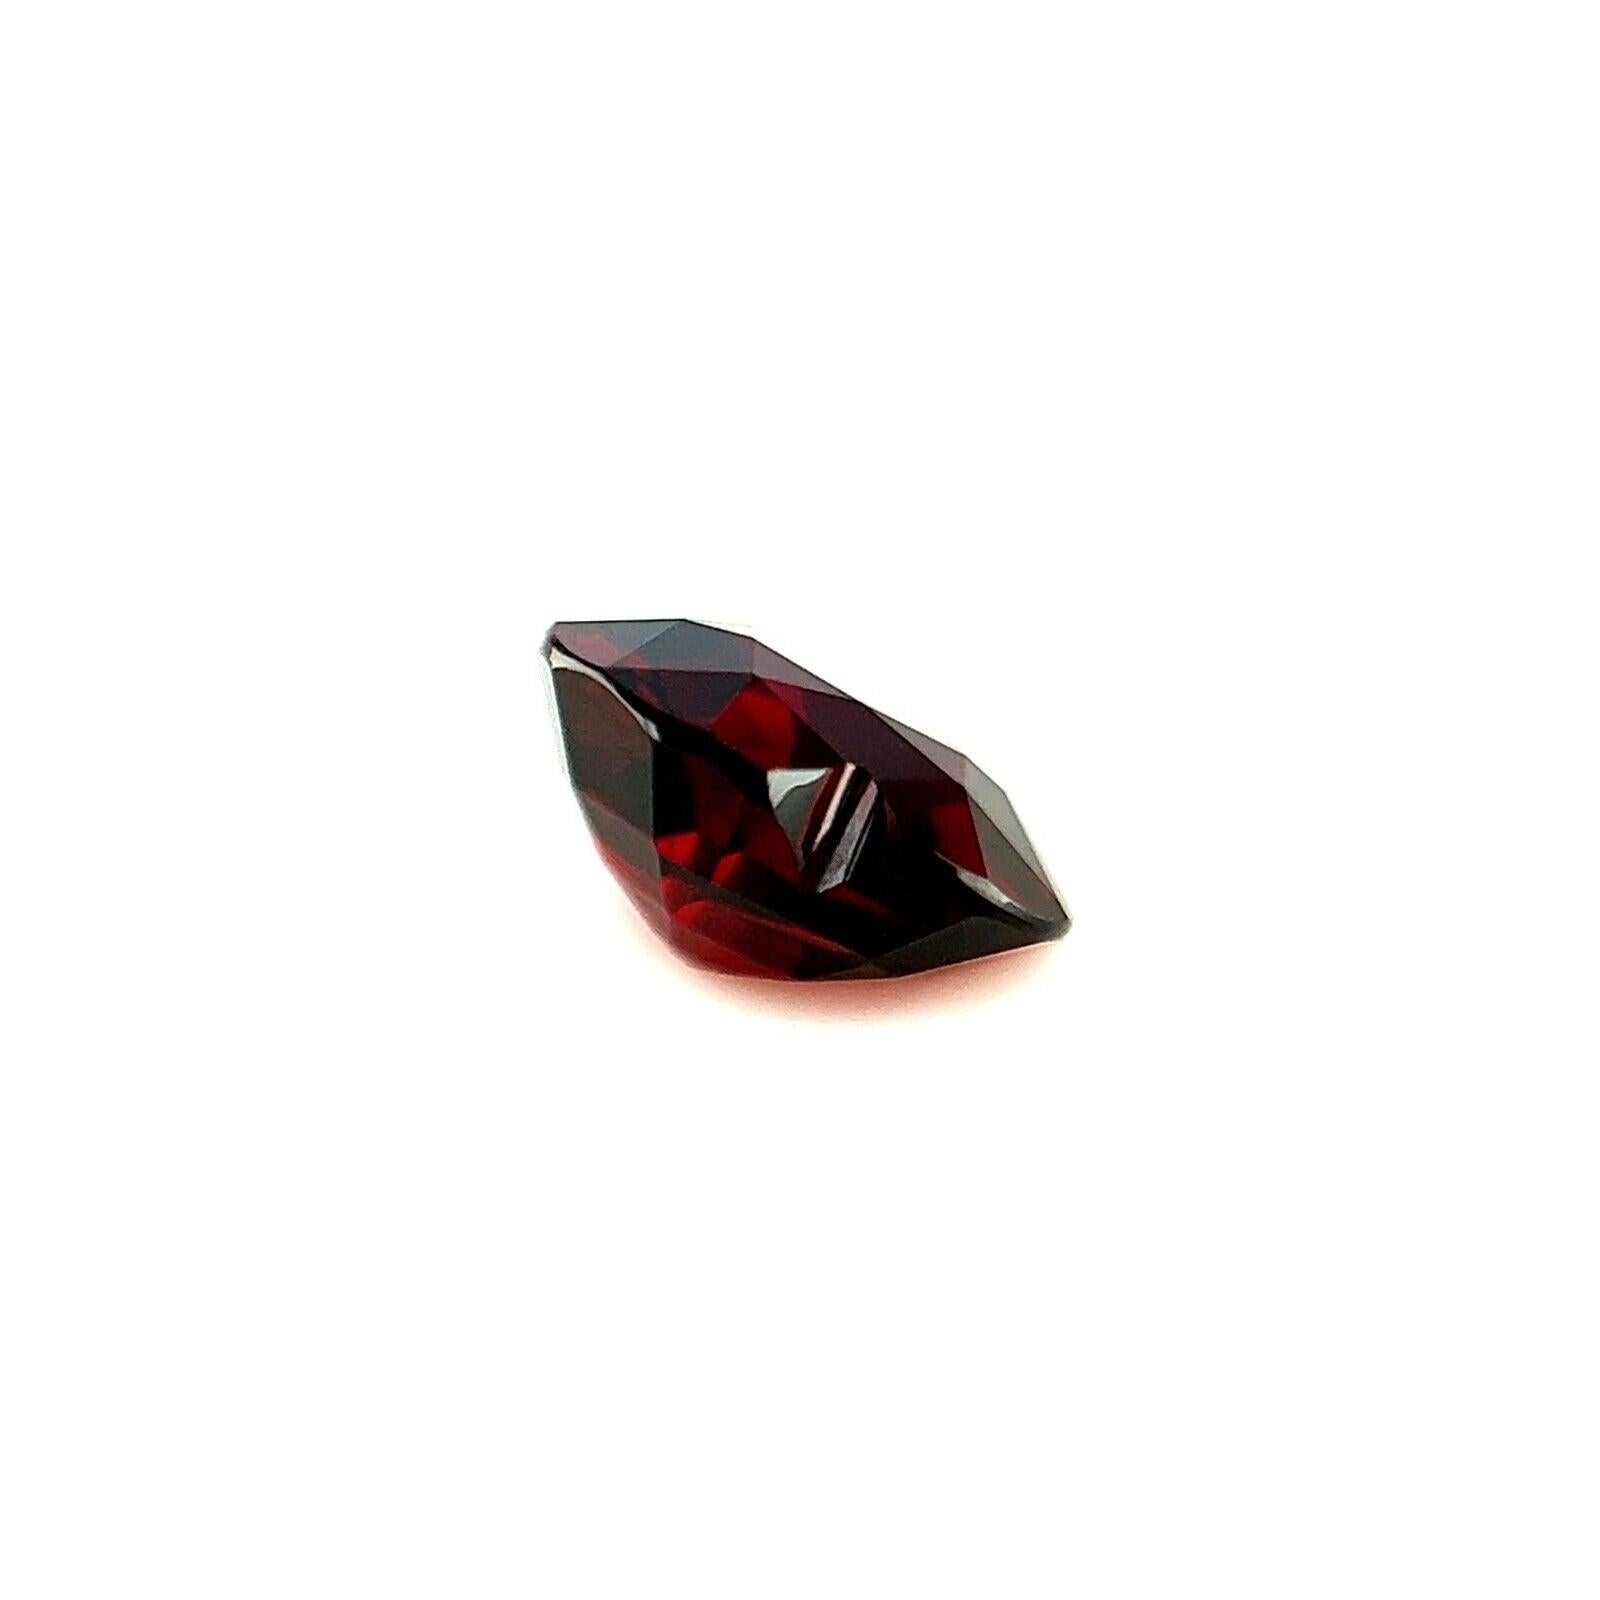 2.33ct Deep Orange Red Spessartine Garnet Heart Cut Loose Gem 8.4x7.4mm IF

Fine Natural Spessartine Garnet Loose Gemstone.
2.33 Carat with a beautiful deep orange red colour and very good clarity, IF.
This stone also has an excellent heart cut with